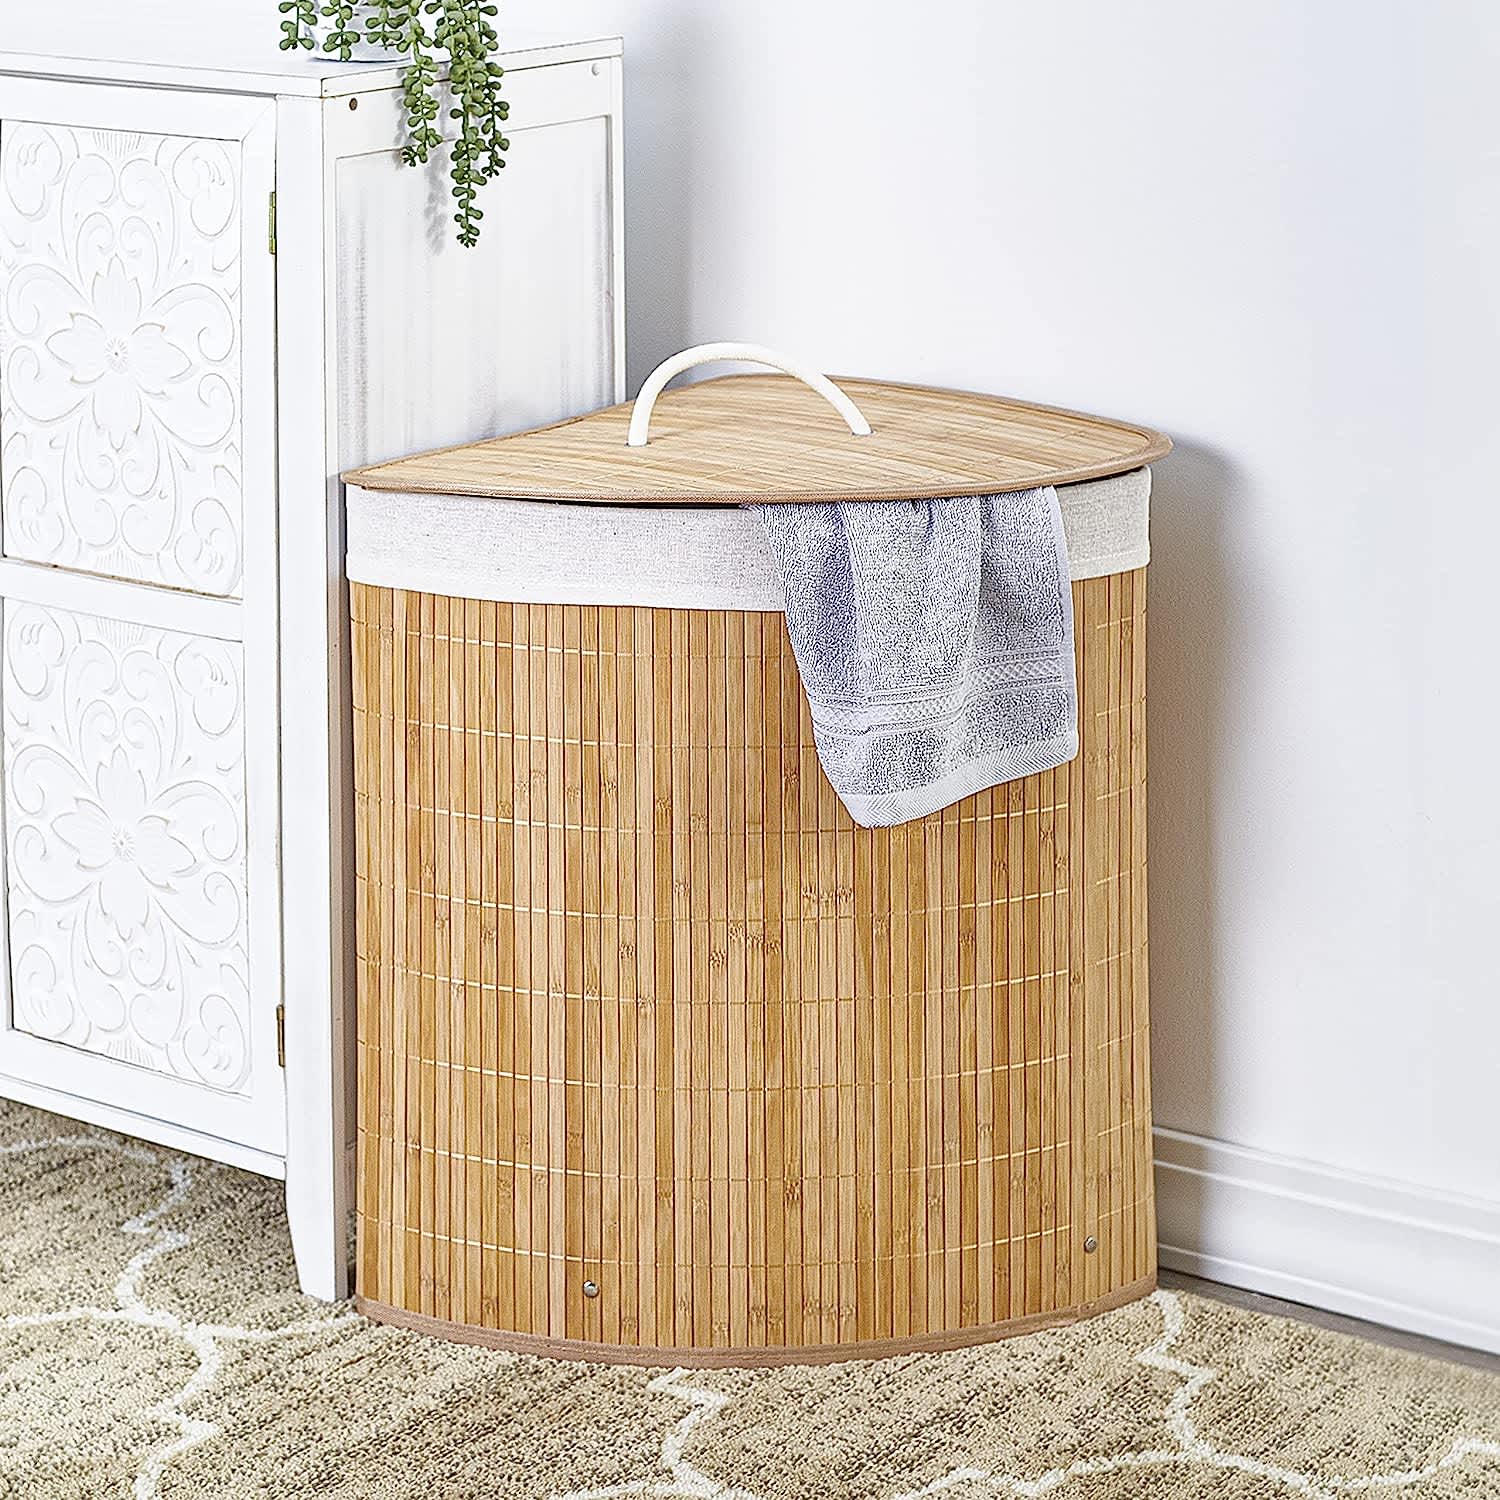 http://cdn.apartmenttherapy.info/image/upload/v1680630411/gen-workflow/product-database/welcome-industrial-bamboo-clothes-hamper-amazon.jpg